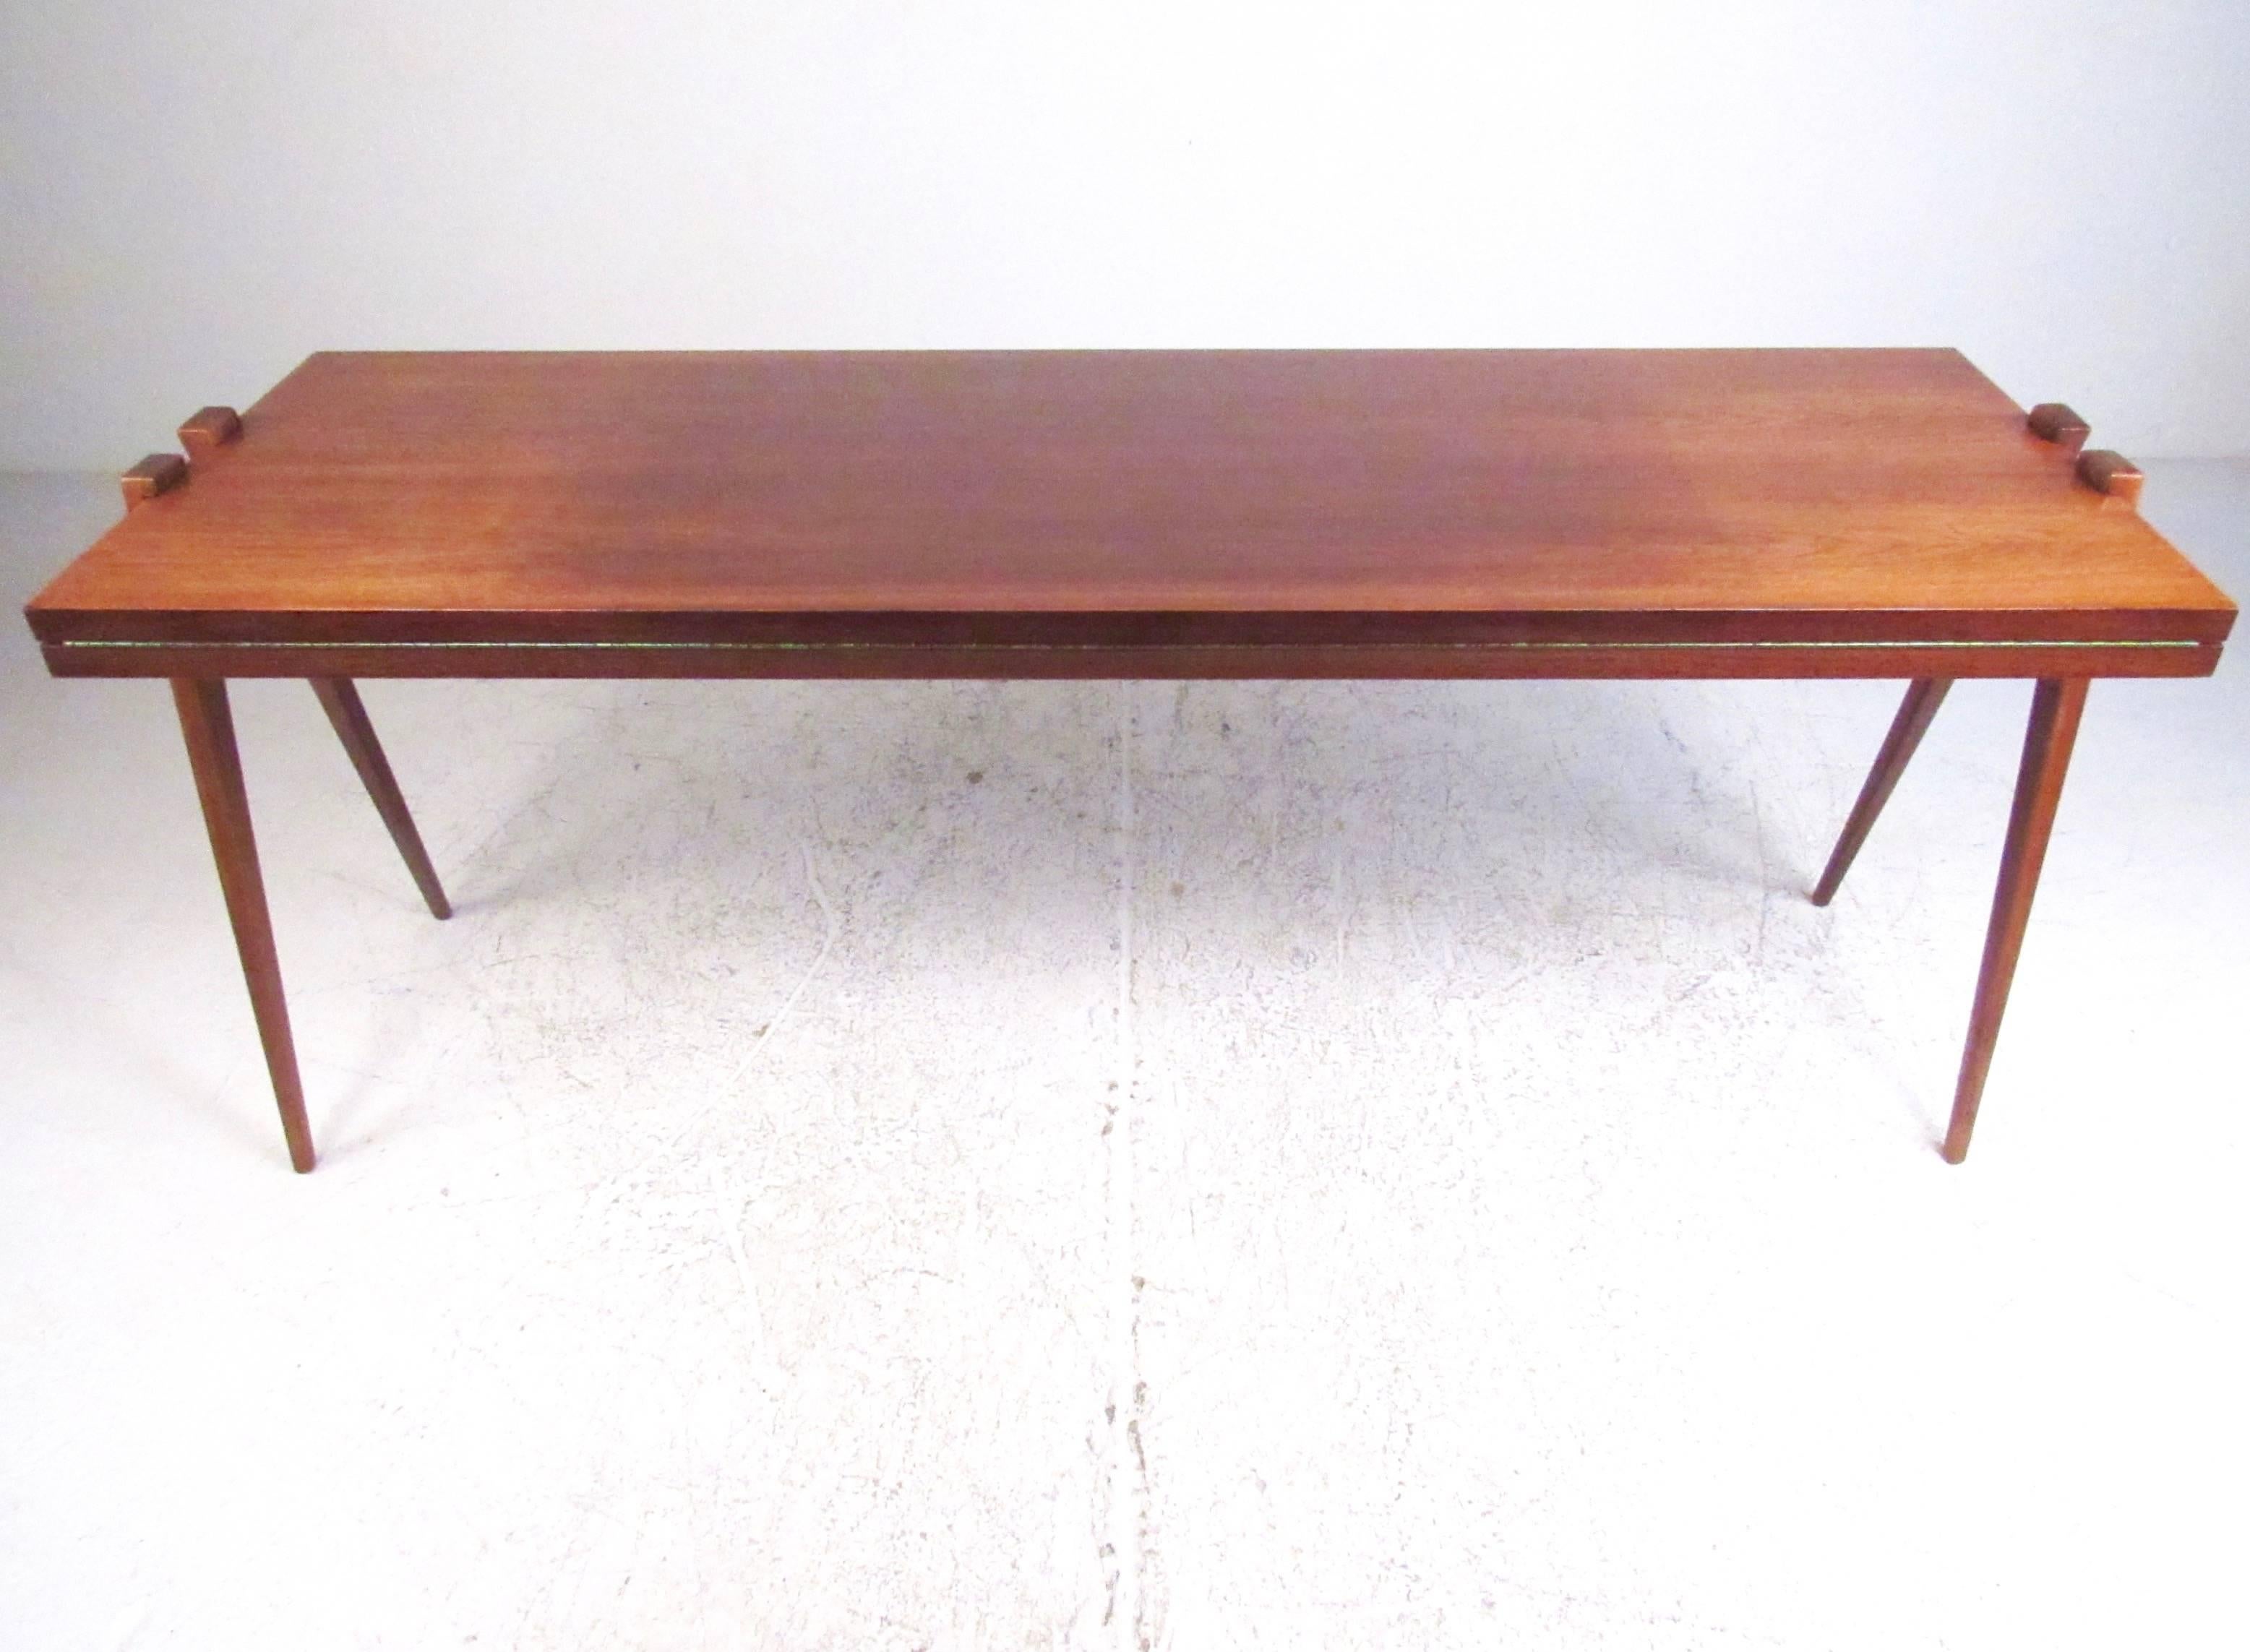 This sleek and stylish Mid-Century dining table features the innovative design of American Phillip Enfield. Tapered legs shift position to open the tabletop from 24 inches x 72 inches to 40 inches x 72 inches. The unique design of this versatile